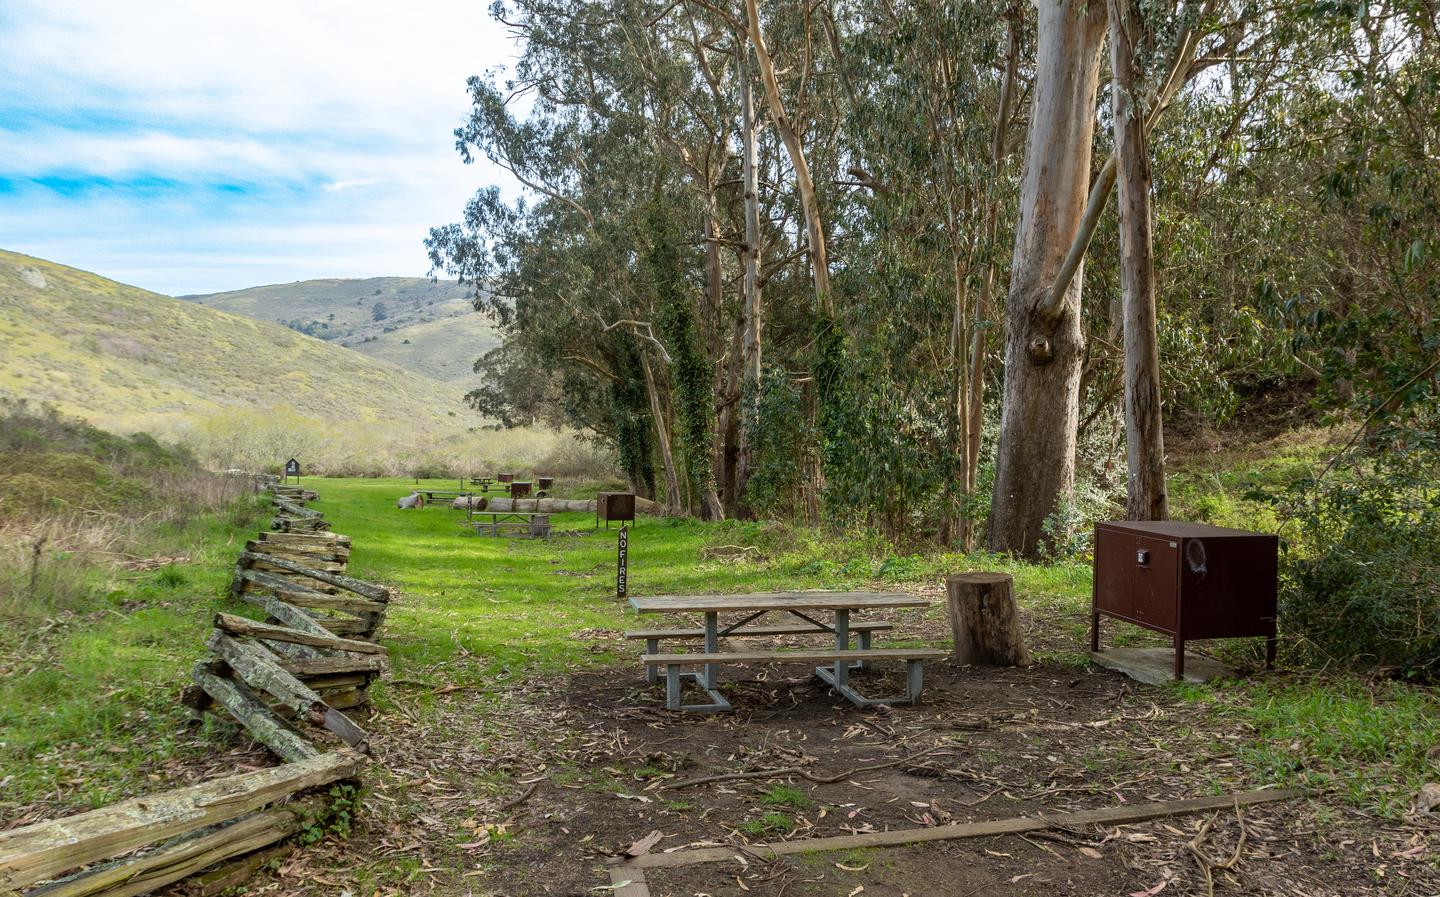 In the foreground are a picnic table and food locker. In the distance are the other campsites, eucalyptus trees, and rolling hills.View of Haypress Campground from Site 5.